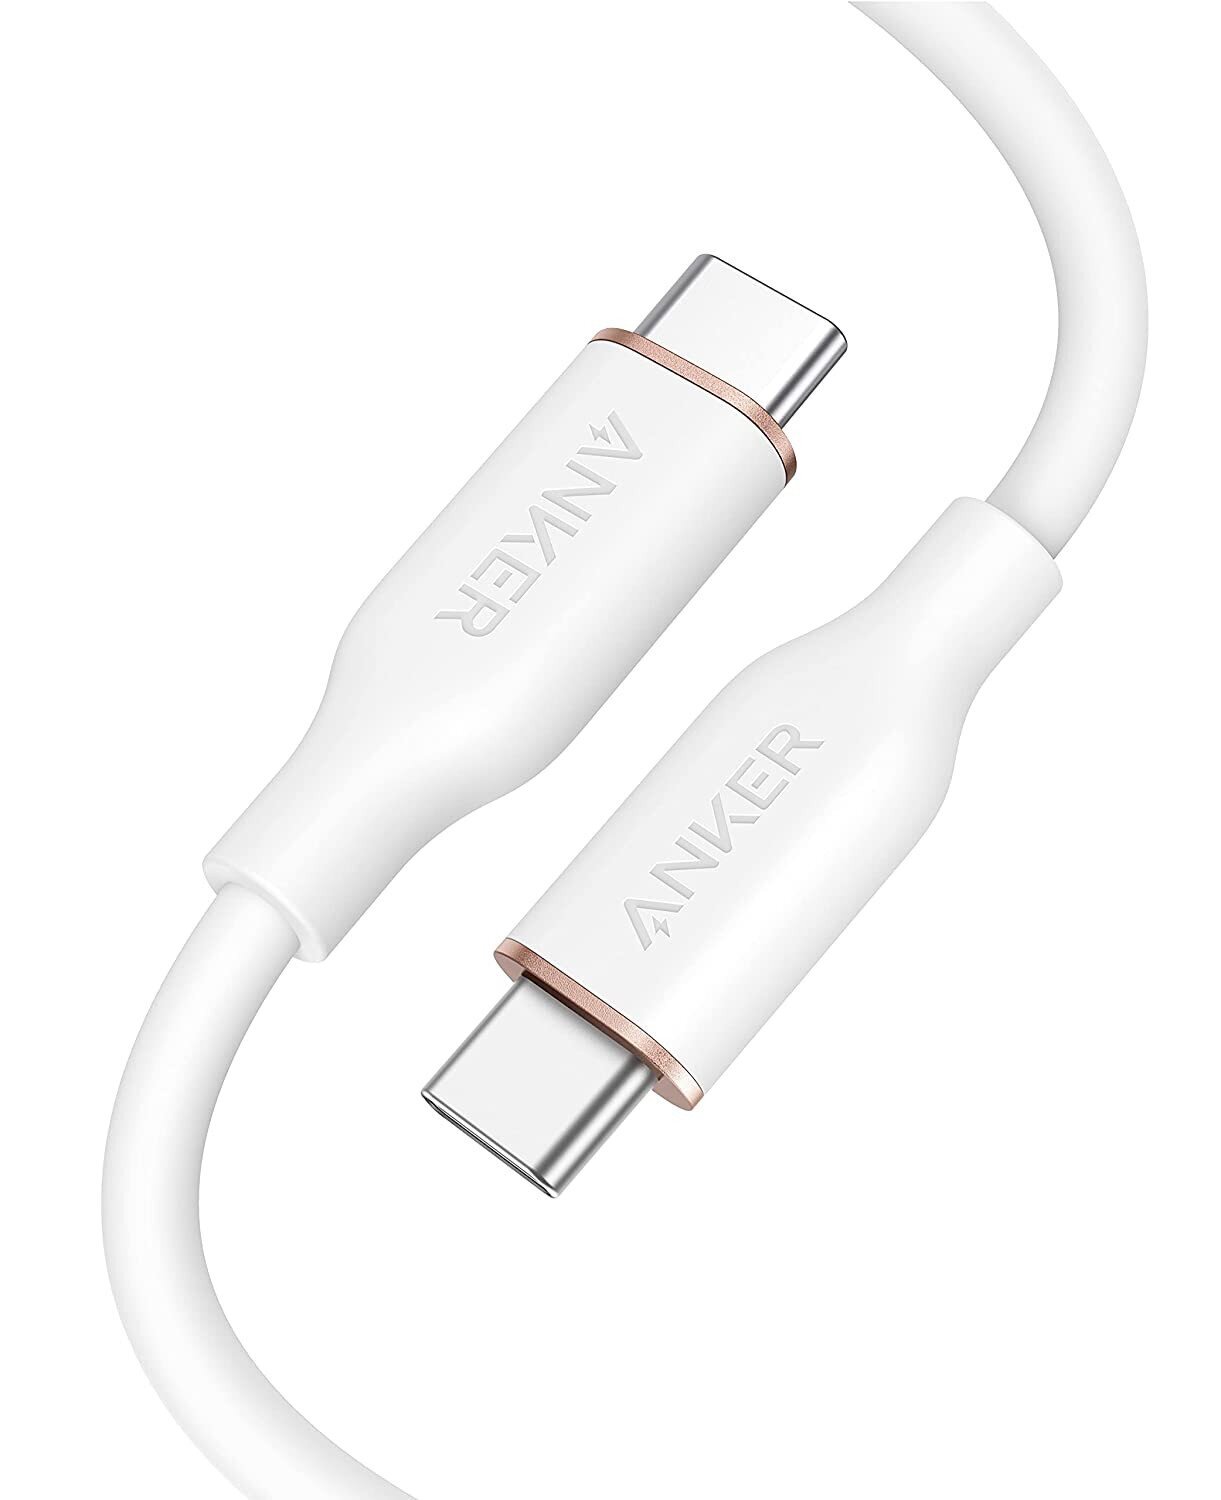 Anker Cable PowerLine III Flow USB-C to USB-C (6 ft. Flow) White  A8553H21-M00000001499